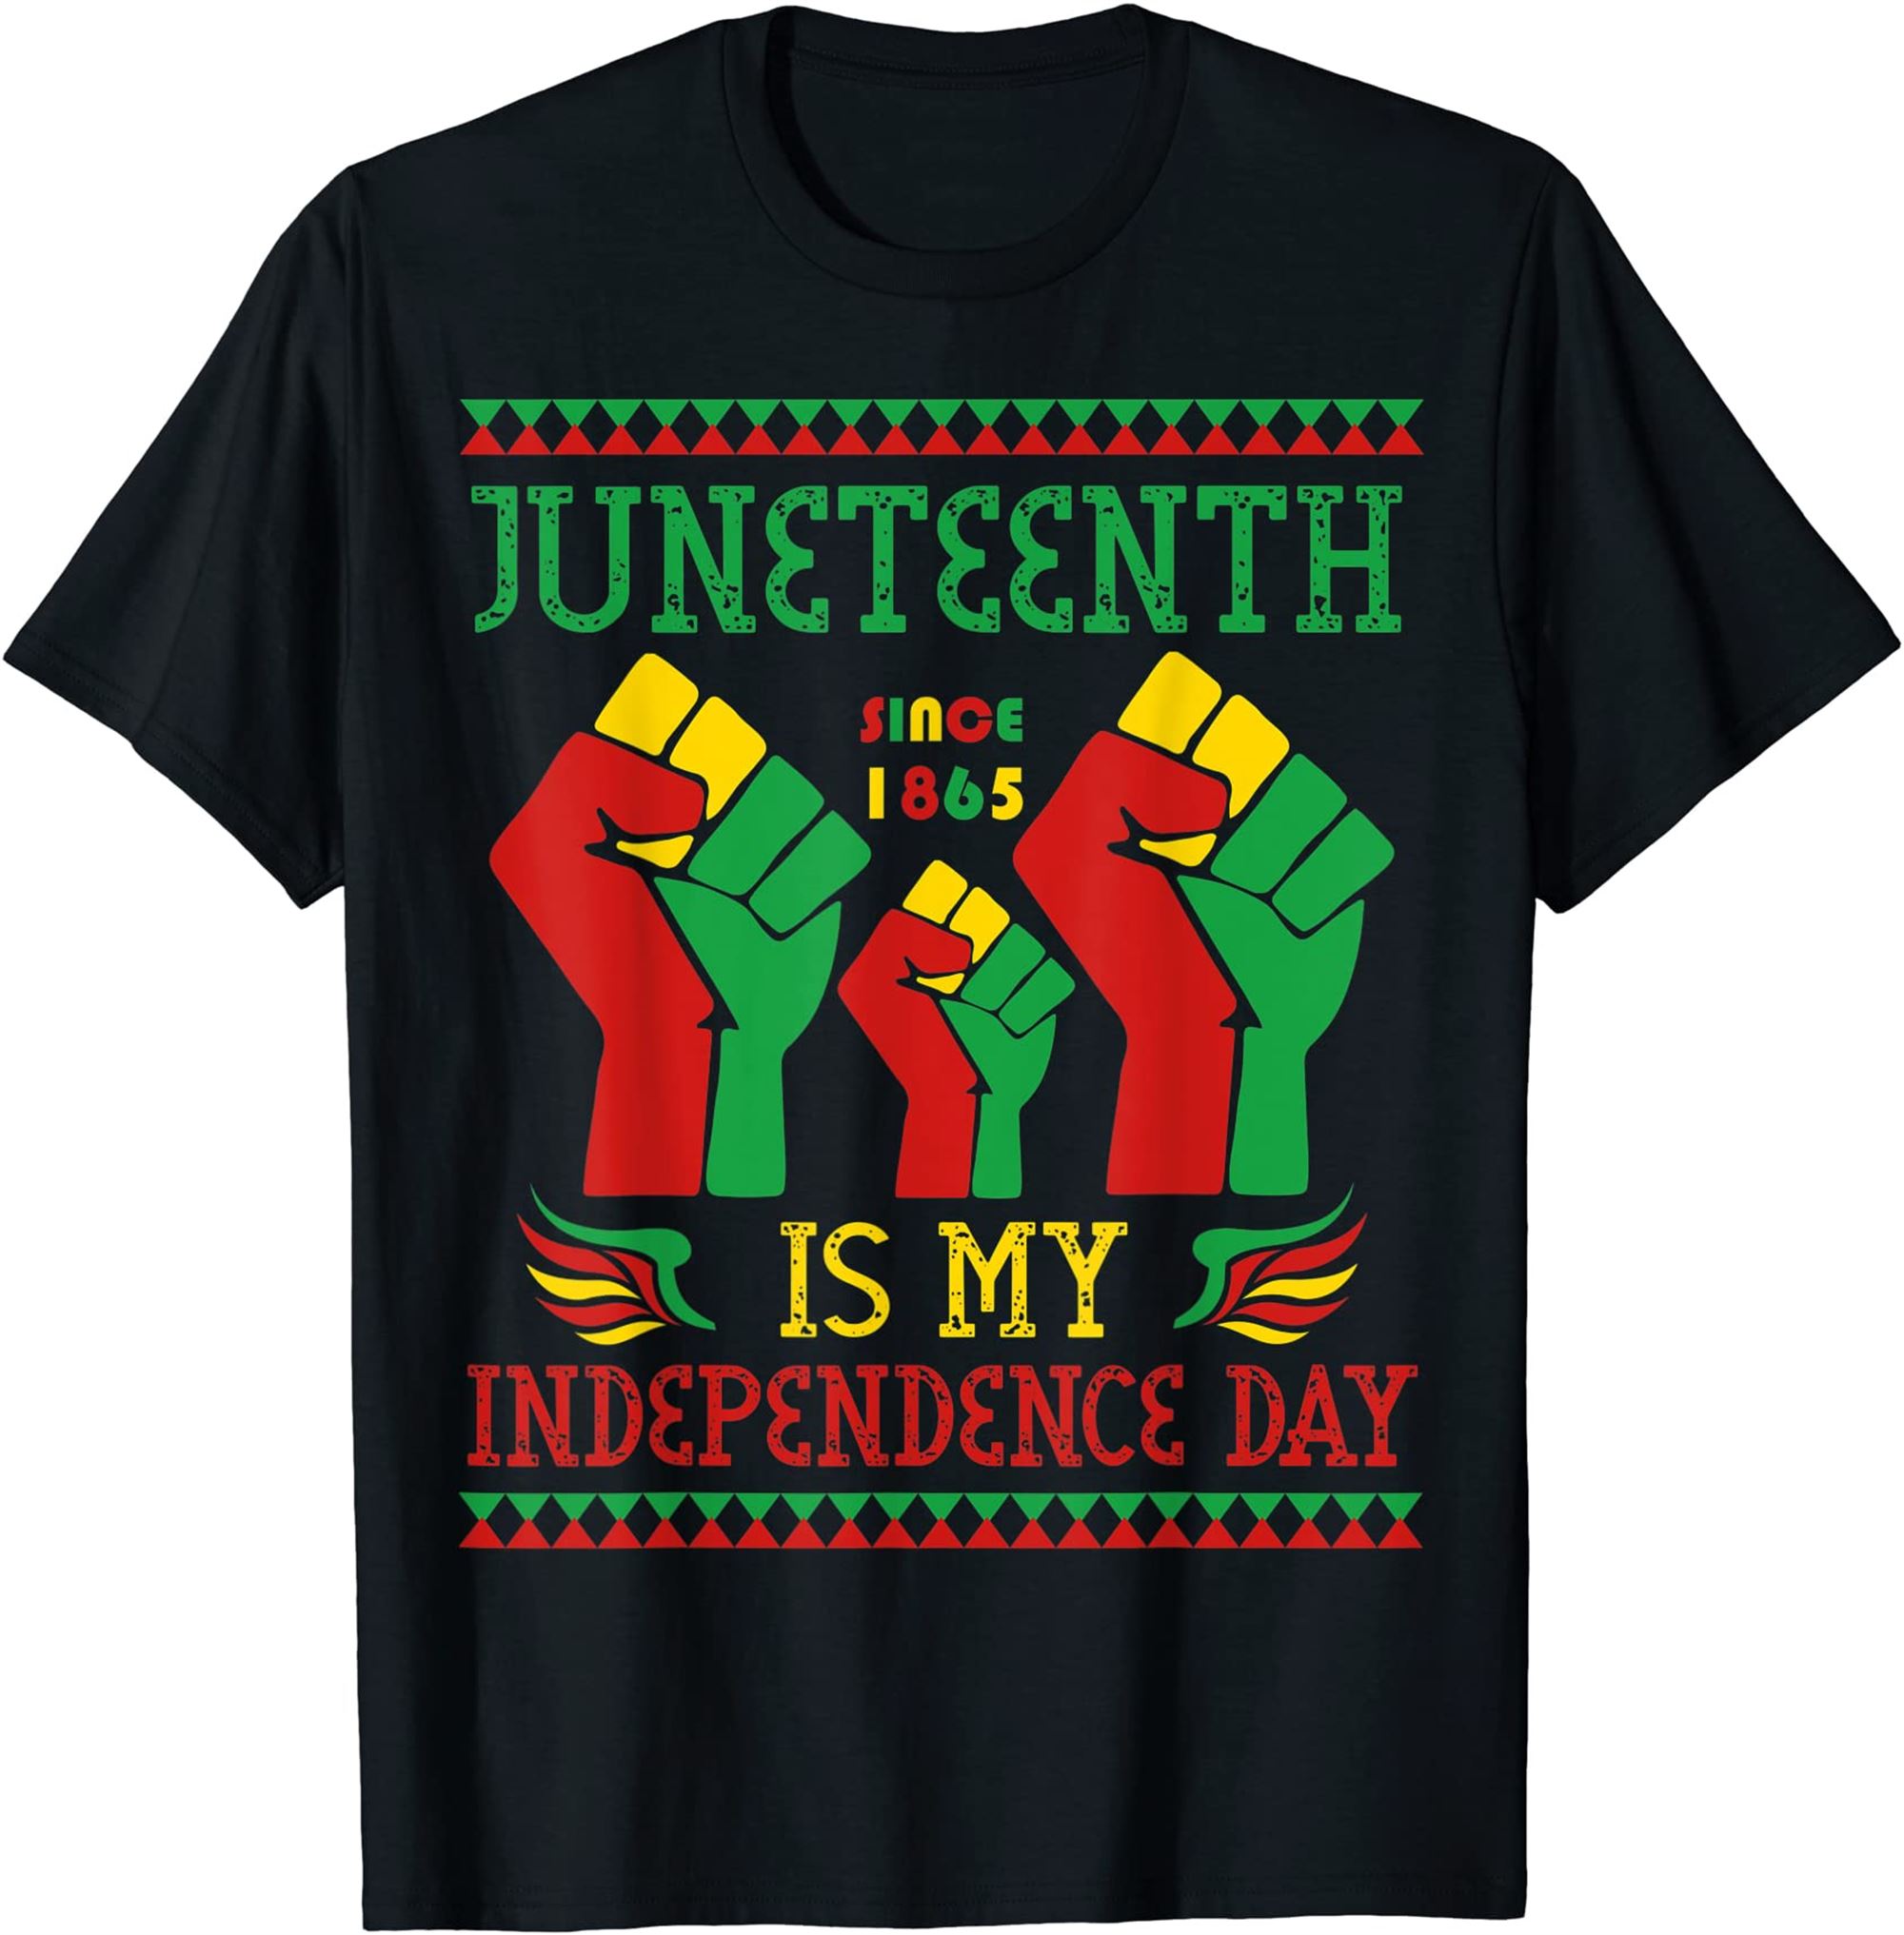 Juneteenth Is My Independence Day Since 1865 T-shirt Full Size Up To 5xl